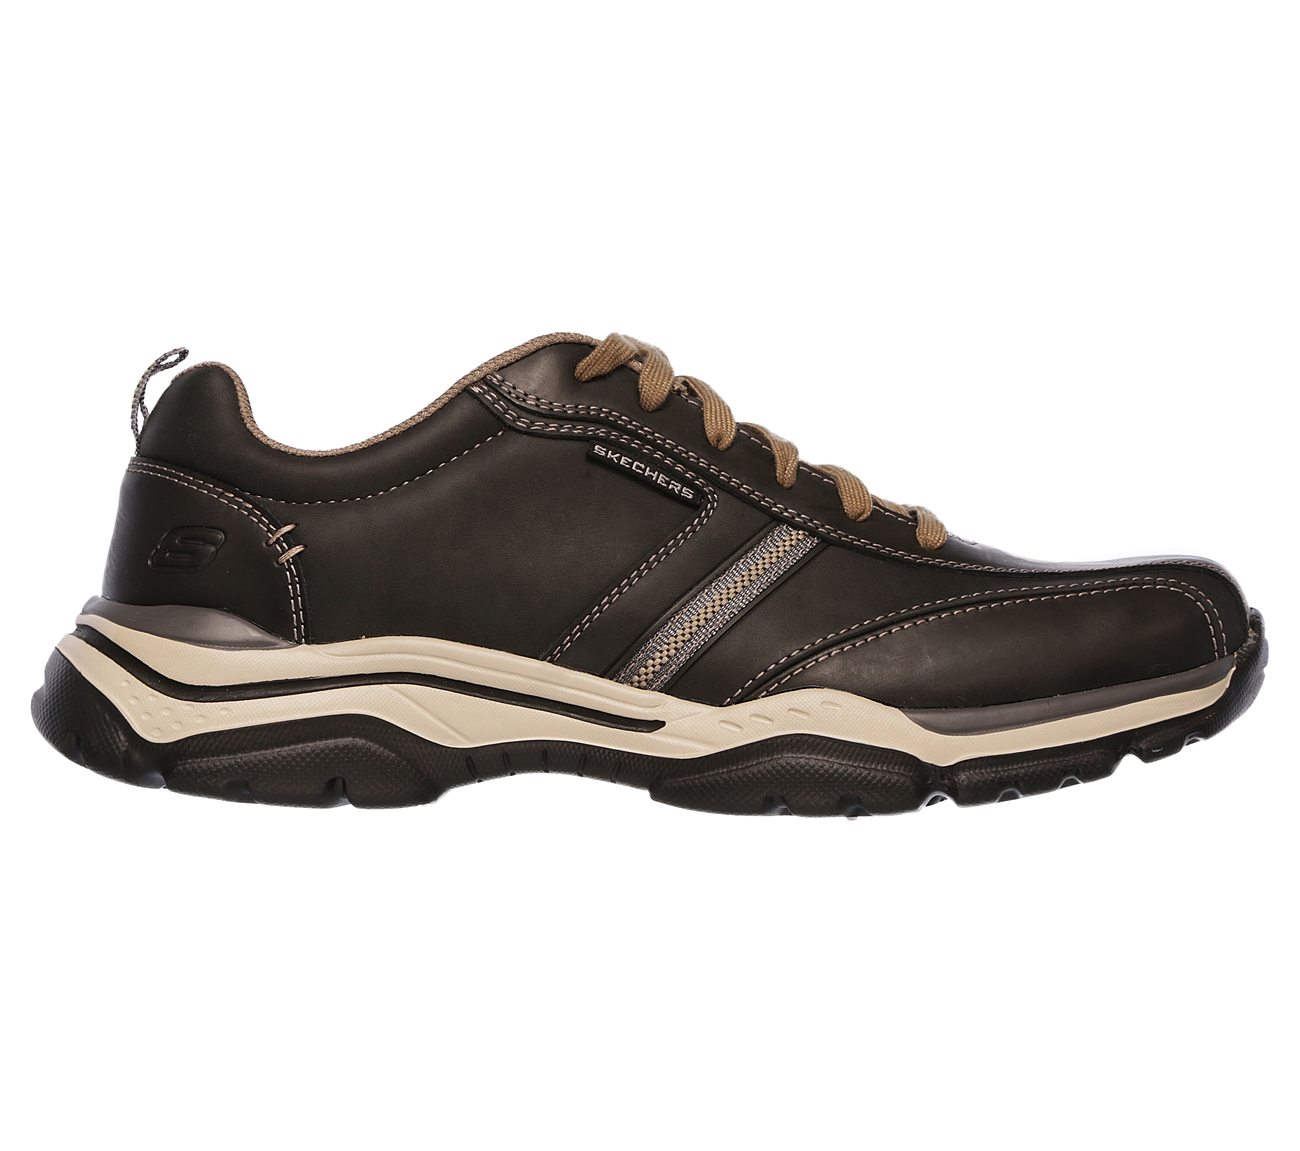 Buy SKECHERS Relaxed Fit: Rovato - Larion SKECHERS USA Shoes